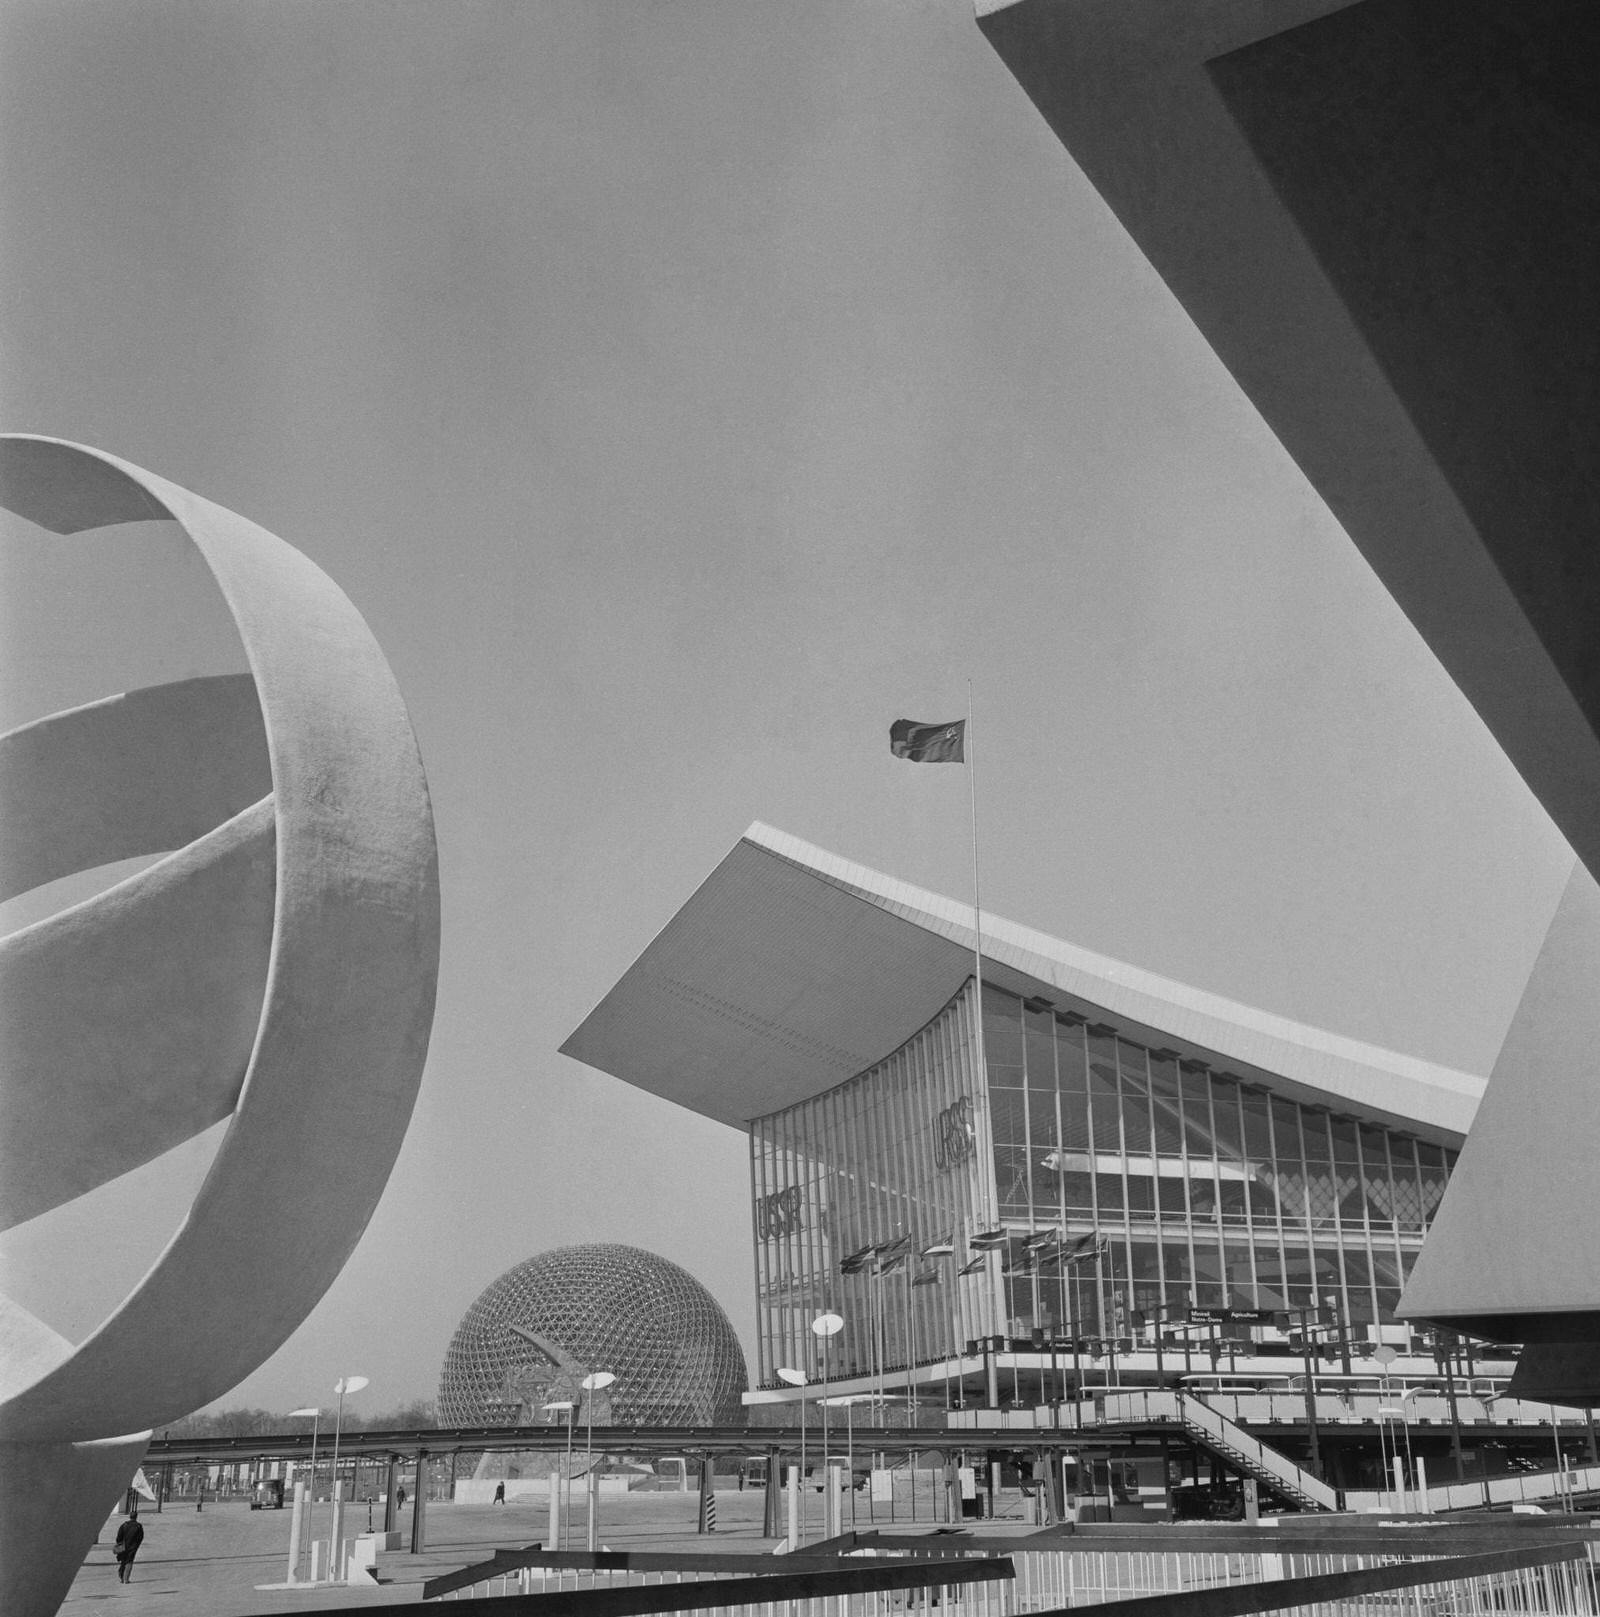 The pavilion of the USSR at the exhibition in Montreal, Canada, in 1967.